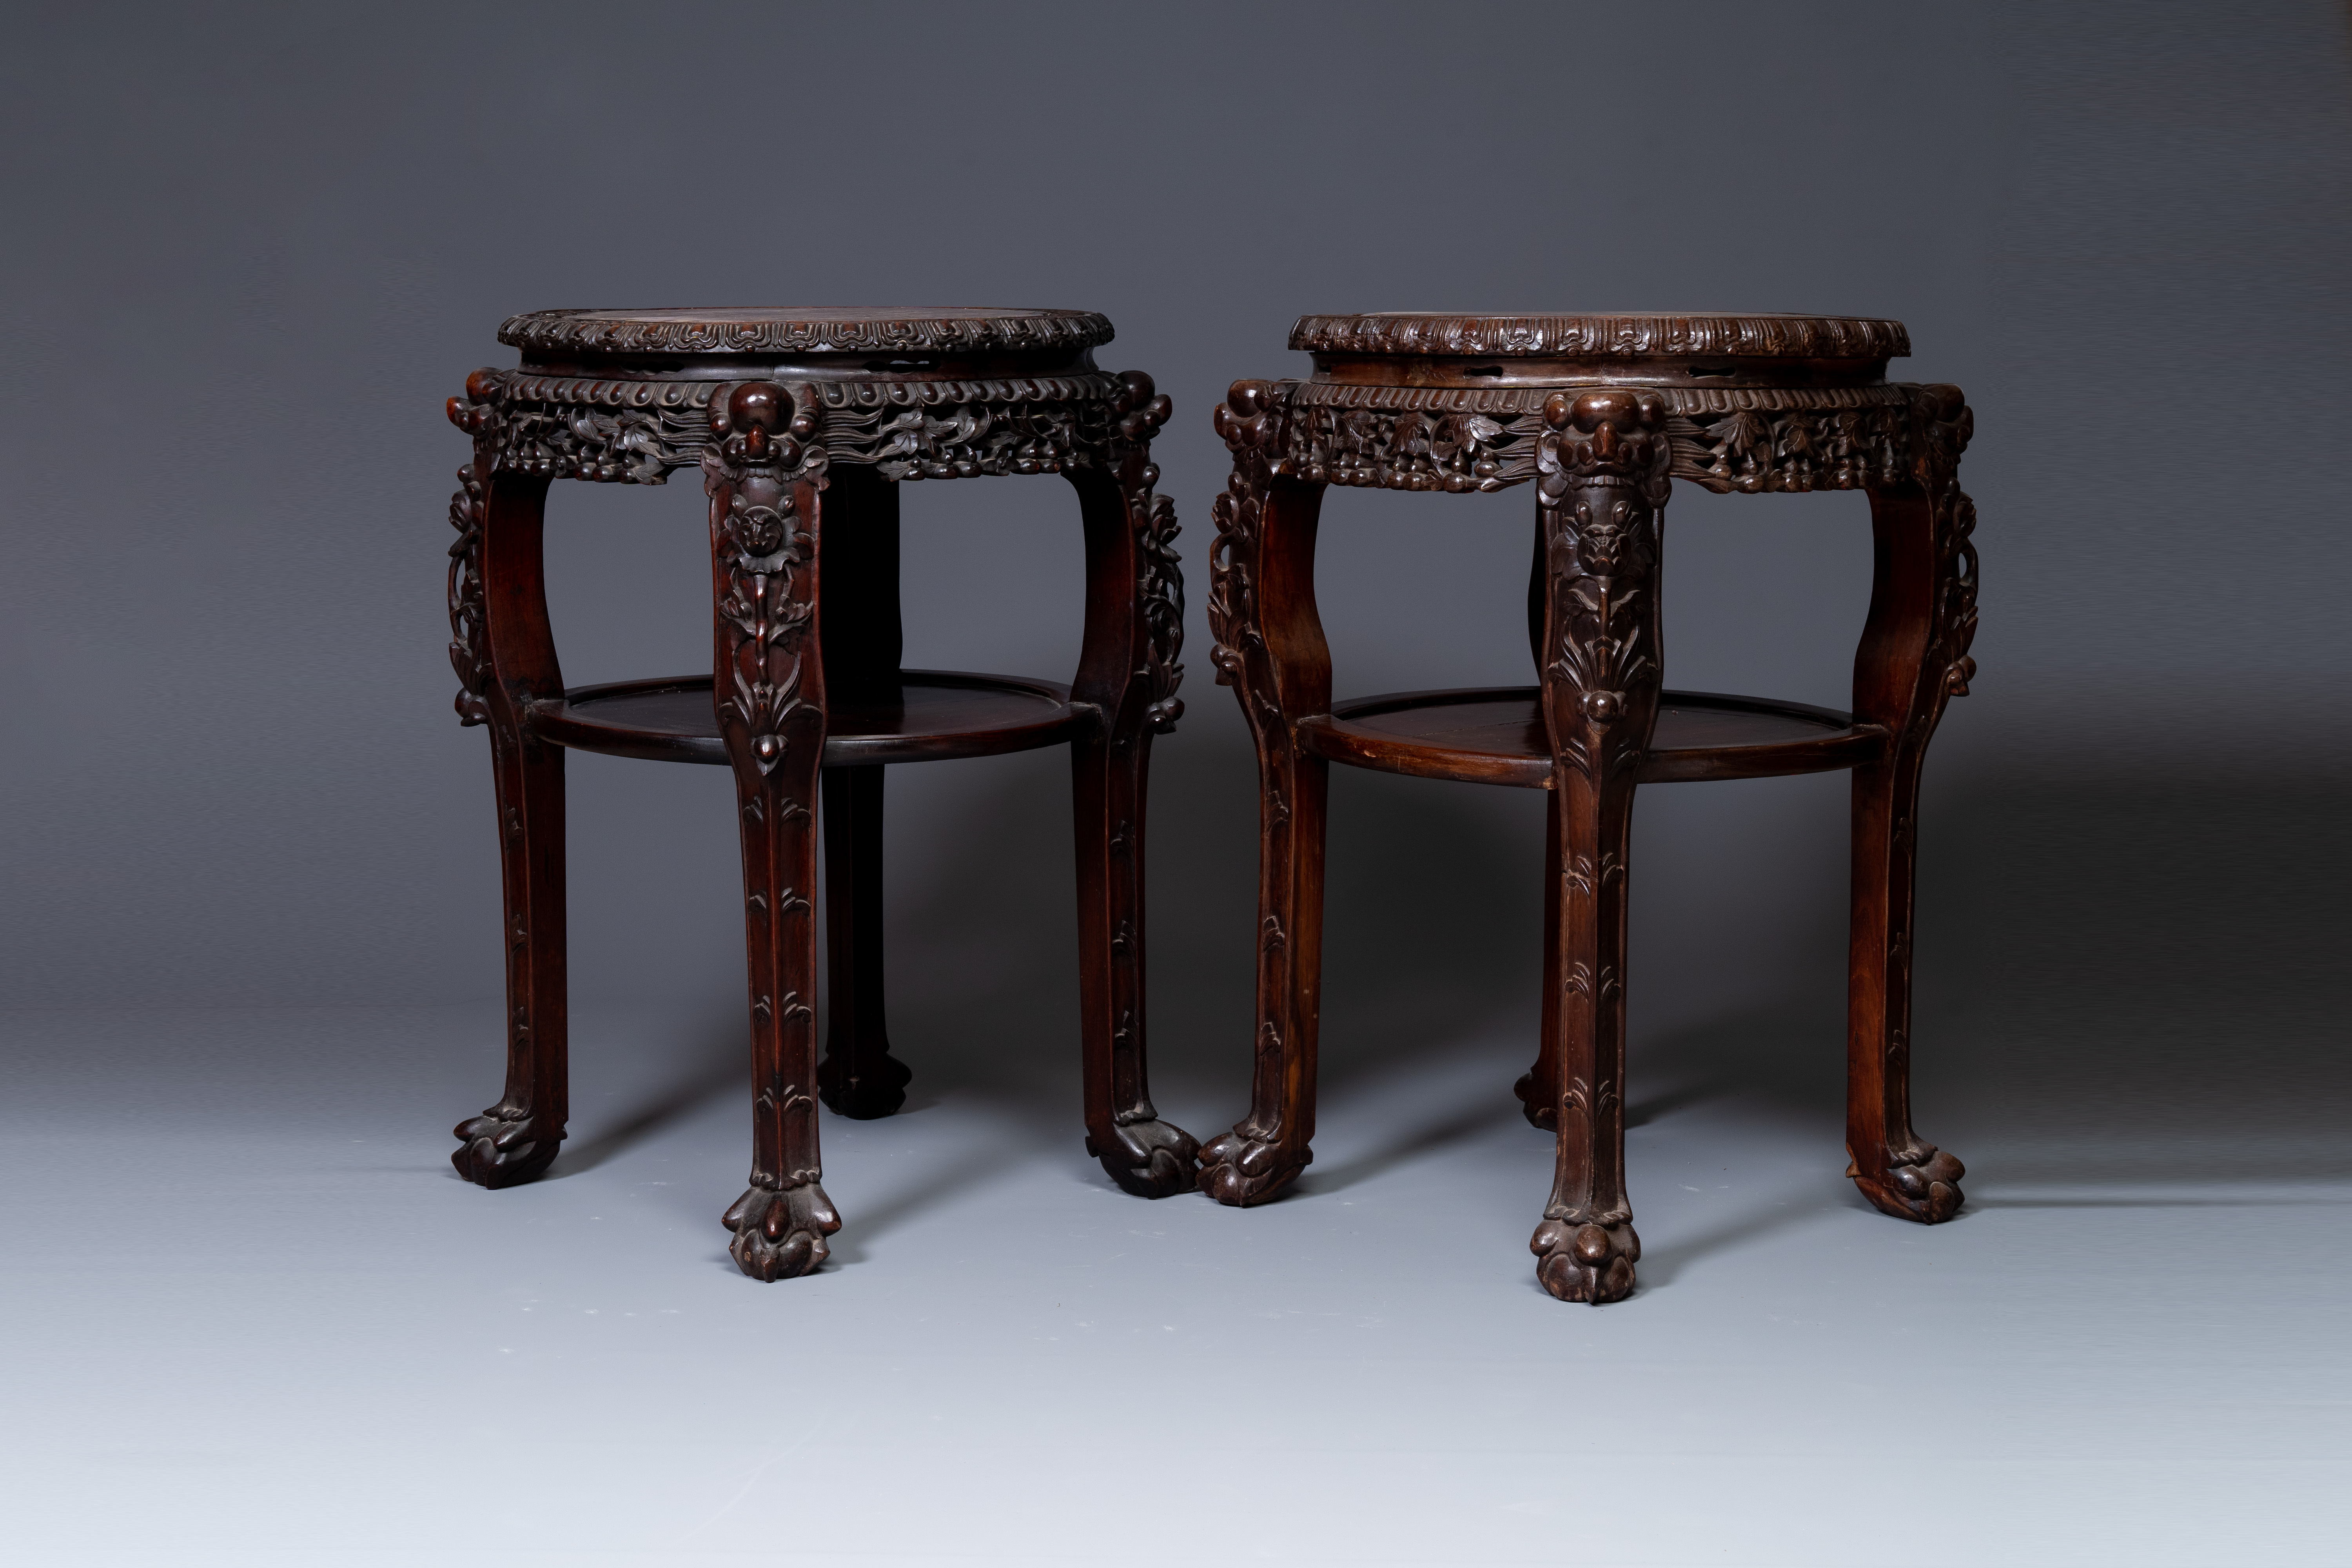 A pair of large Chinese carved wooden stands with marble tops, 19th C. - Image 2 of 5